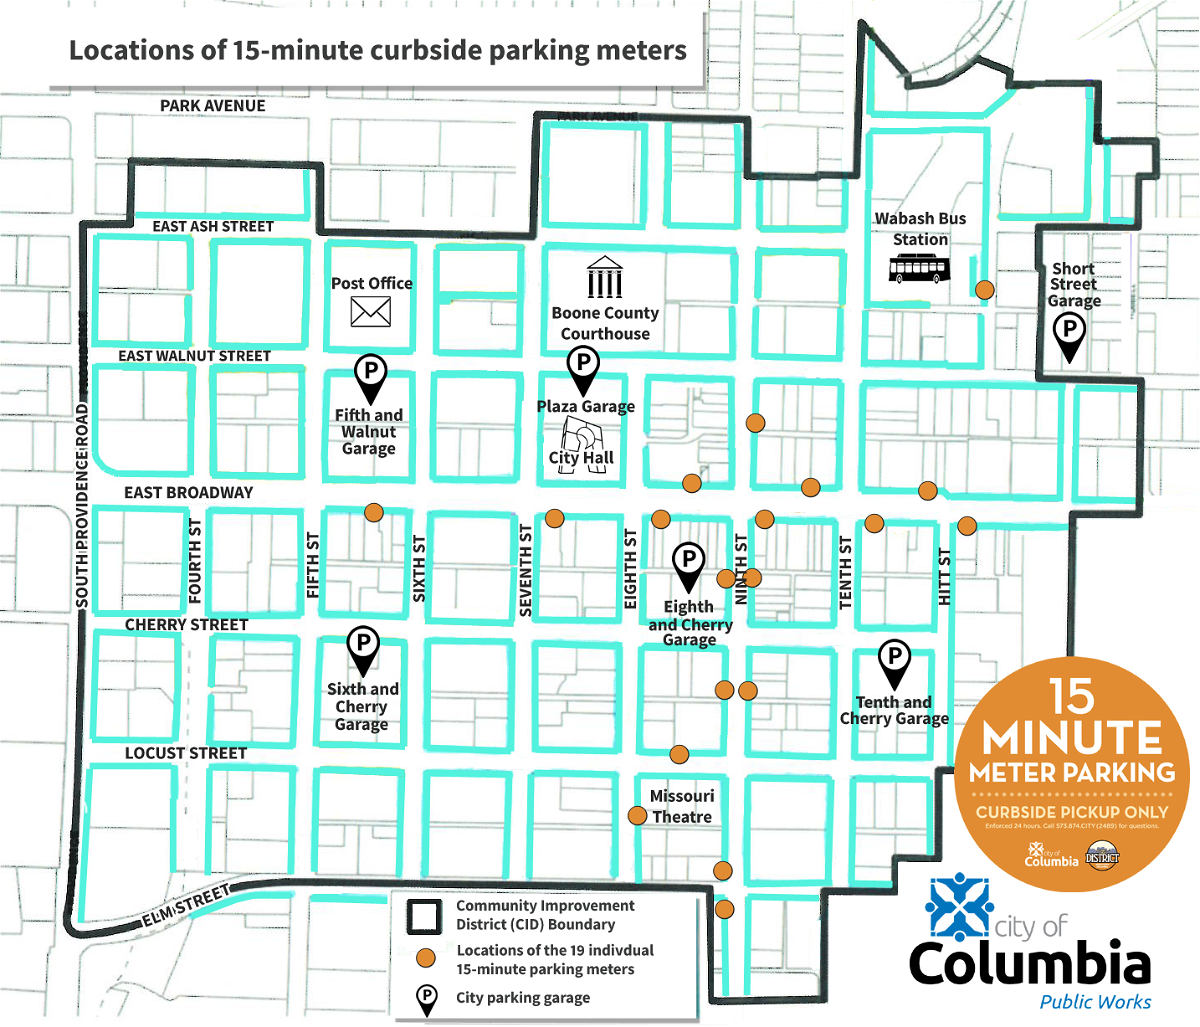 The City of Columbia will begin installing new 15-minute parking meters in downtown Columbia on Monday, according to a press release from the city.